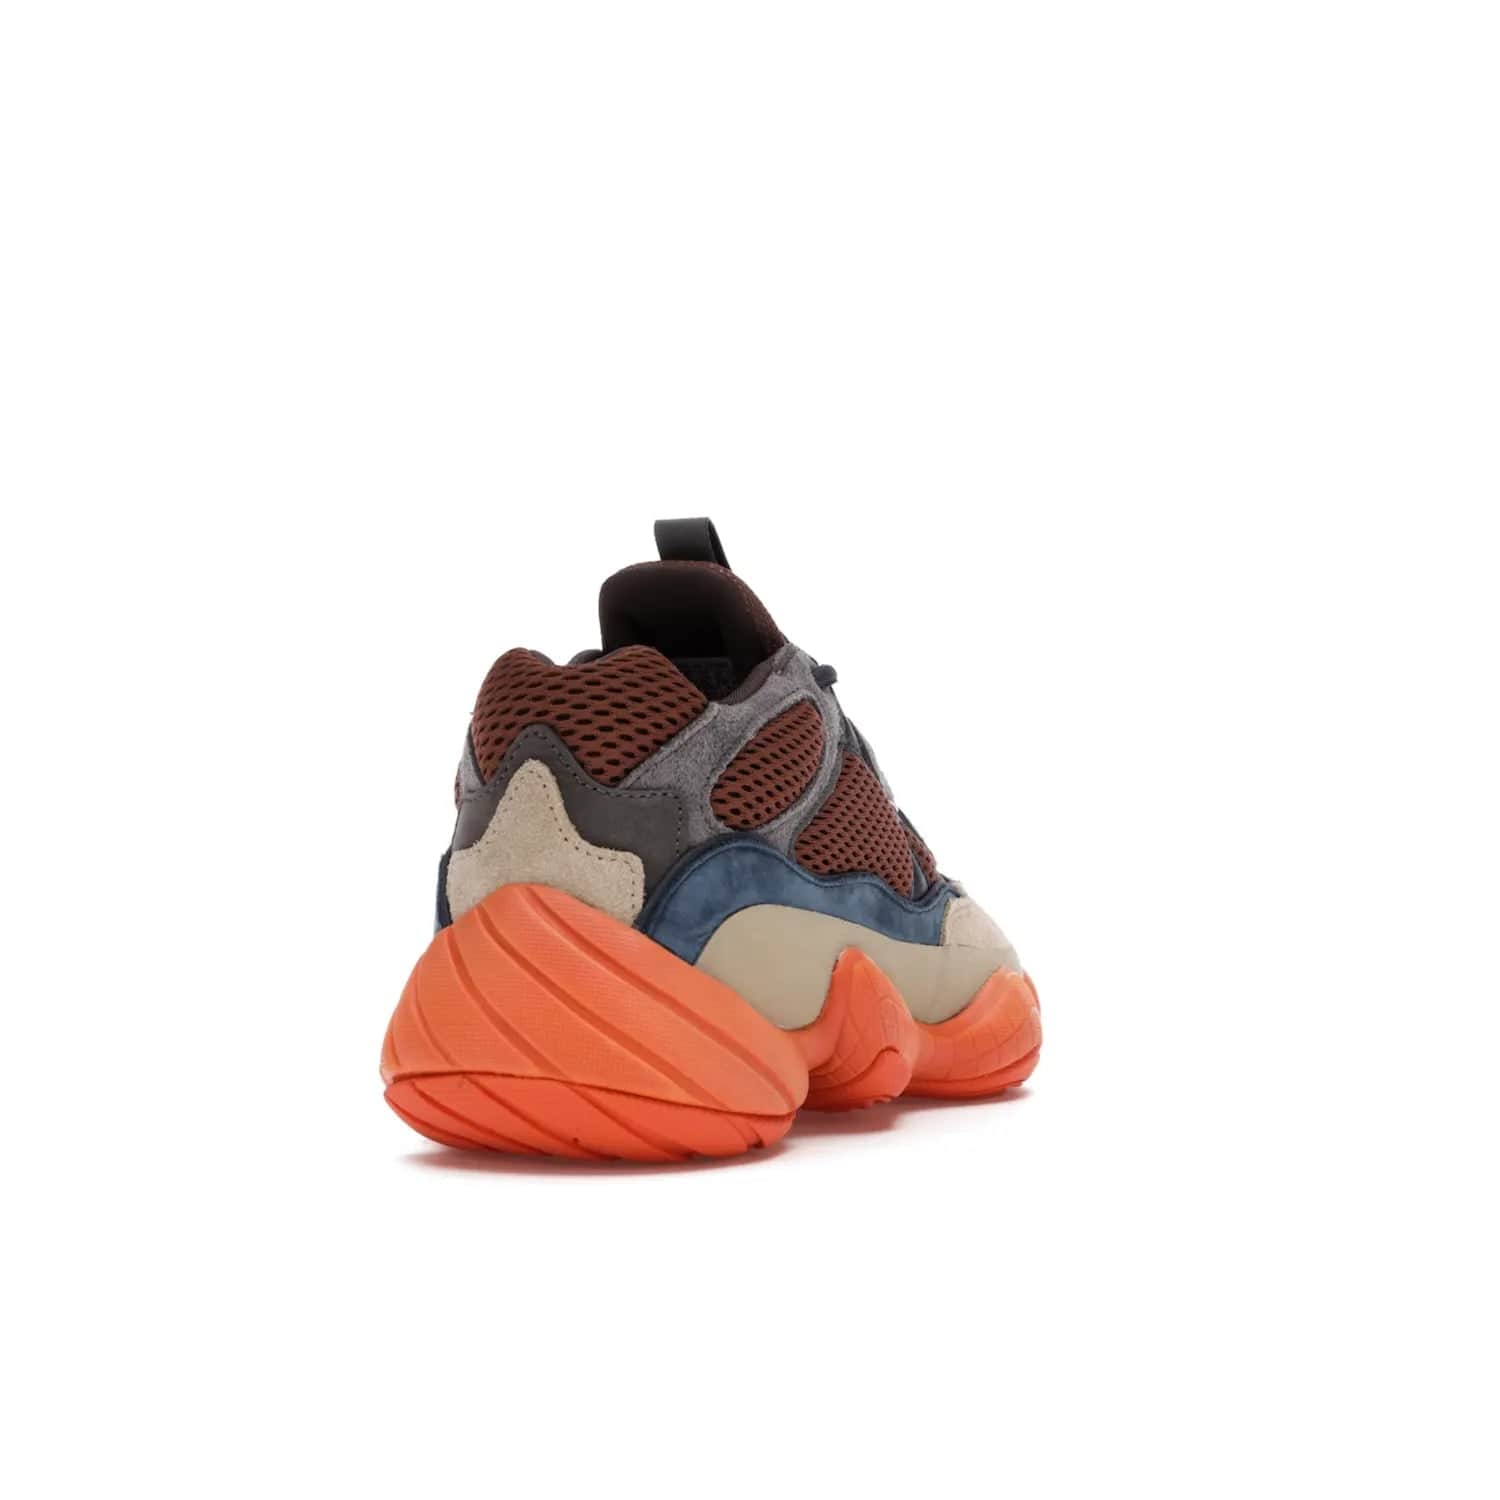 adidas Yeezy 500 Enflame - Image 30 - Only at www.BallersClubKickz.com - Step into style with the adidas Yeezy 500 Enflame. Mix of mesh, leather, and suede layered together to create tonal-brown, dark blue, & orange. Orange AdiPRENE sole provides superior cushioning & comfort. Get yours and experience maximum style.